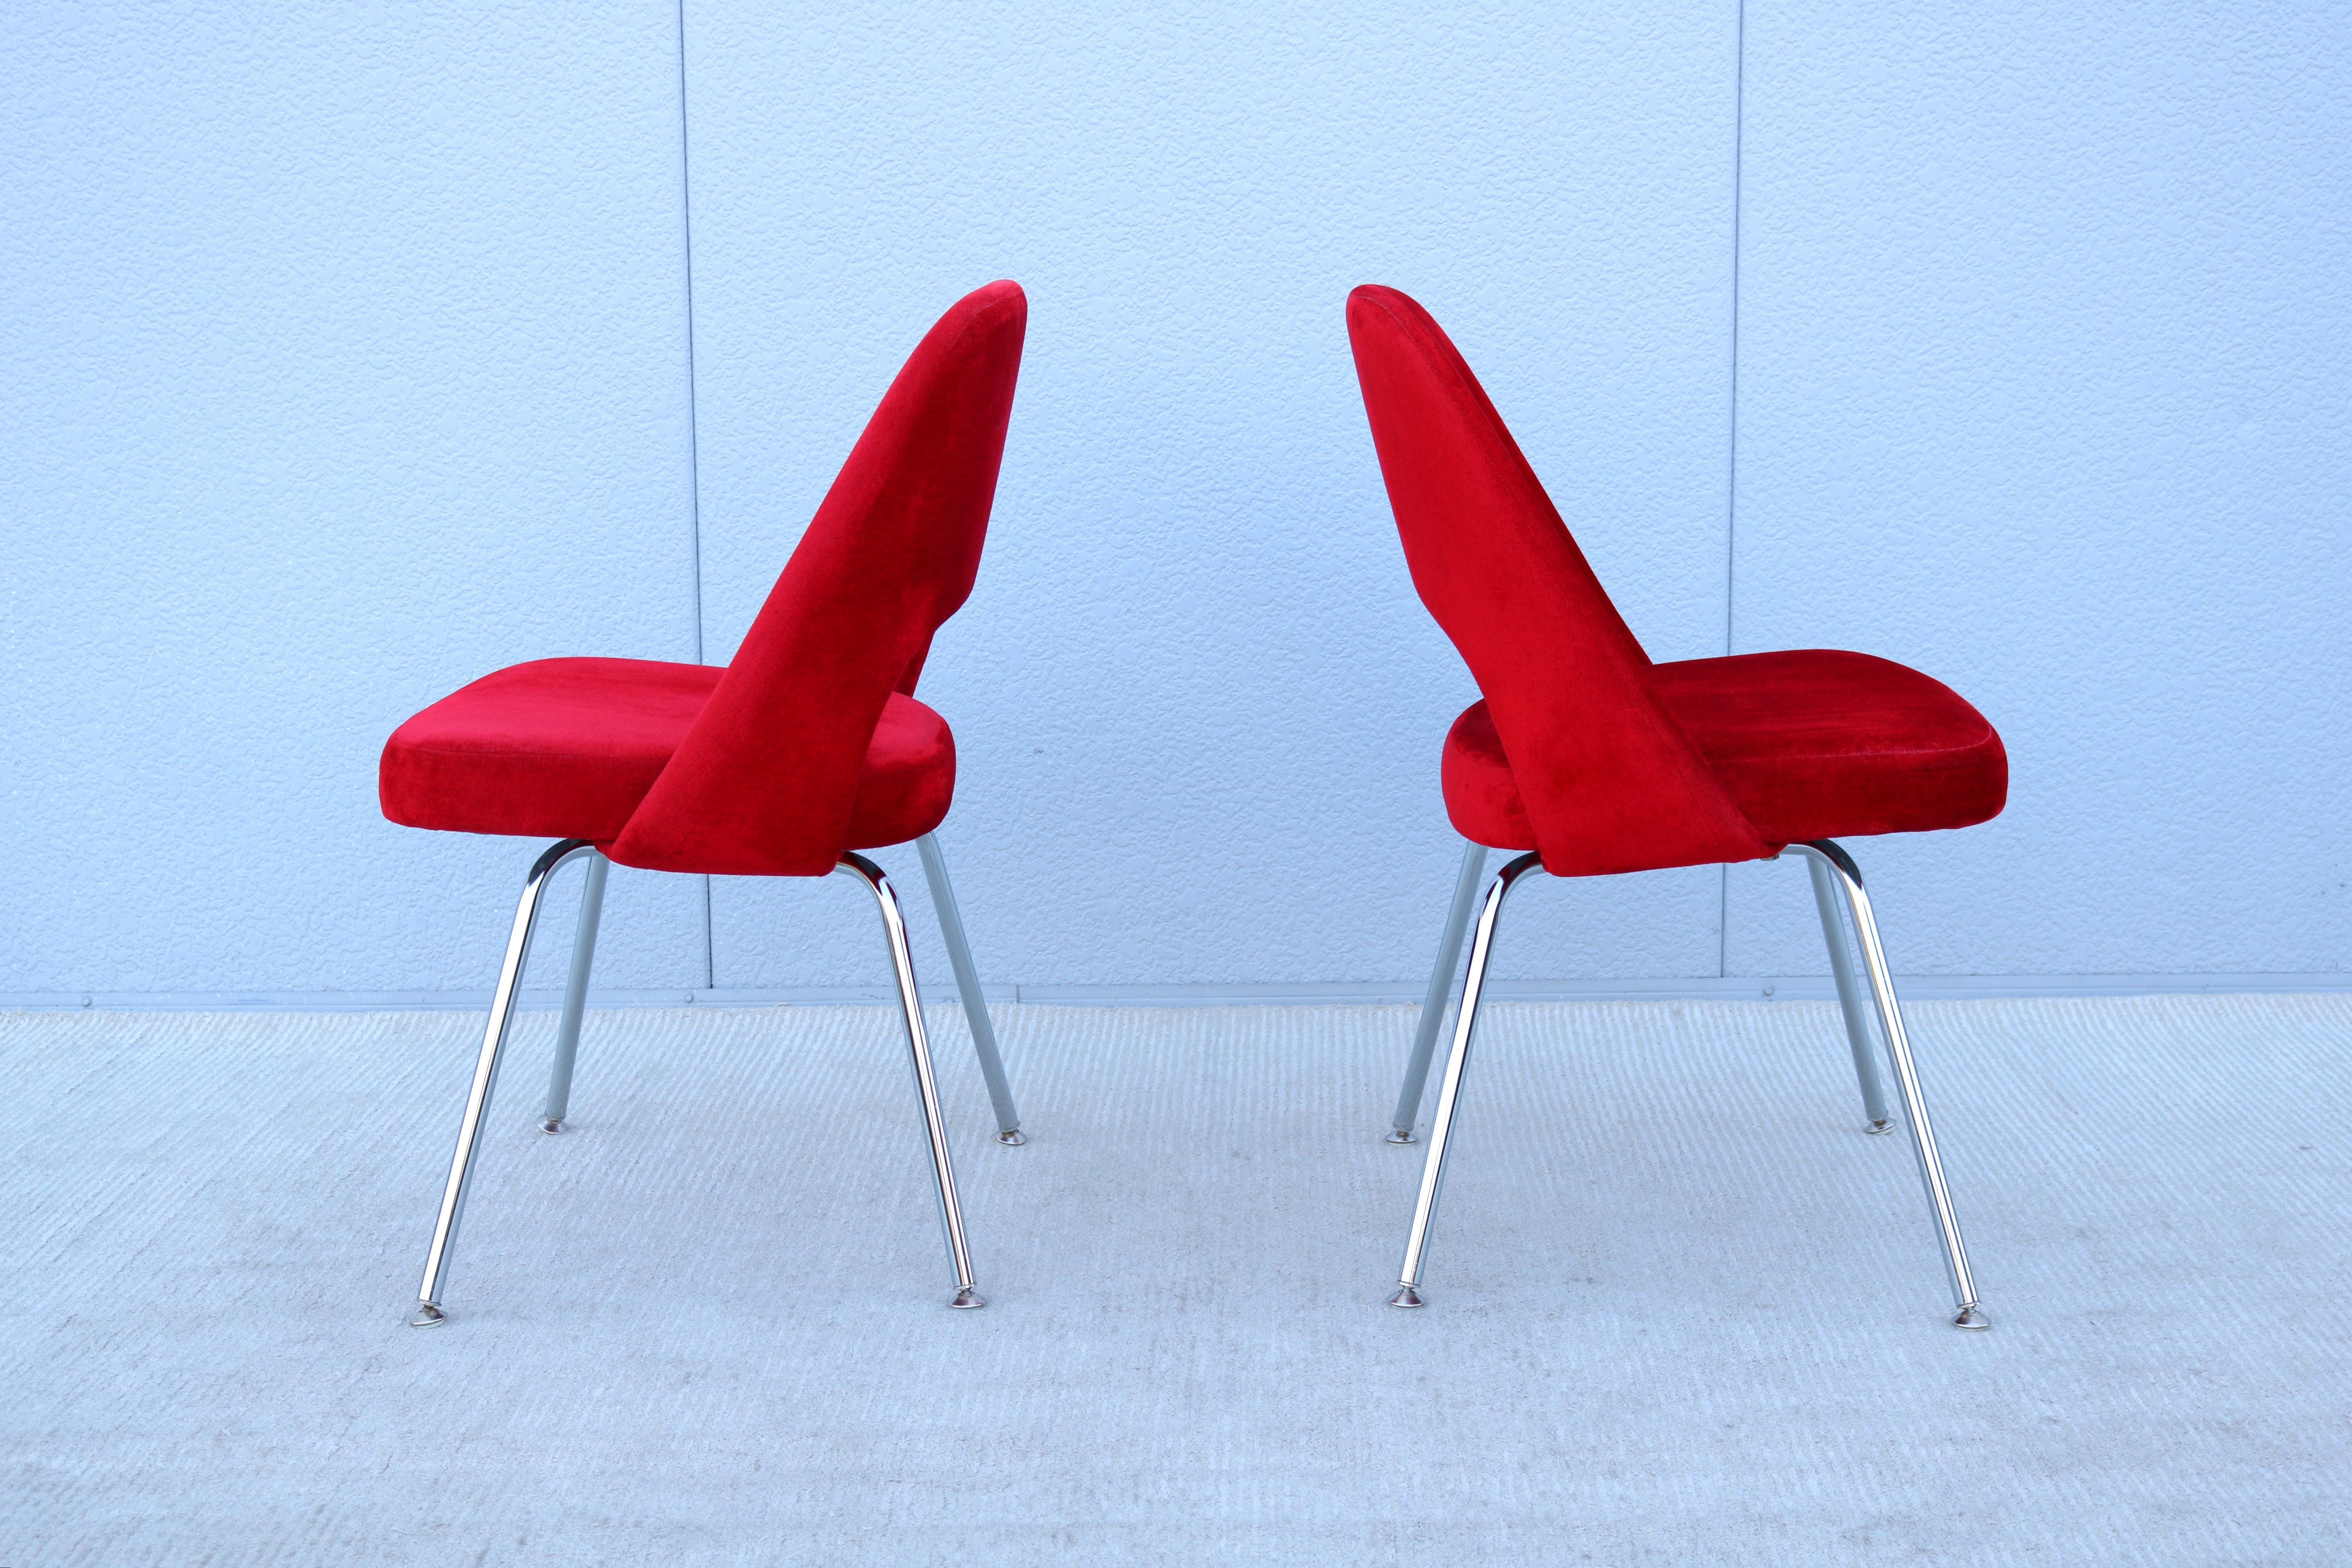 Mid-Century Modern Eero Saarinen for Knoll Red Executive Armless Chairs - a Pair For Sale 3